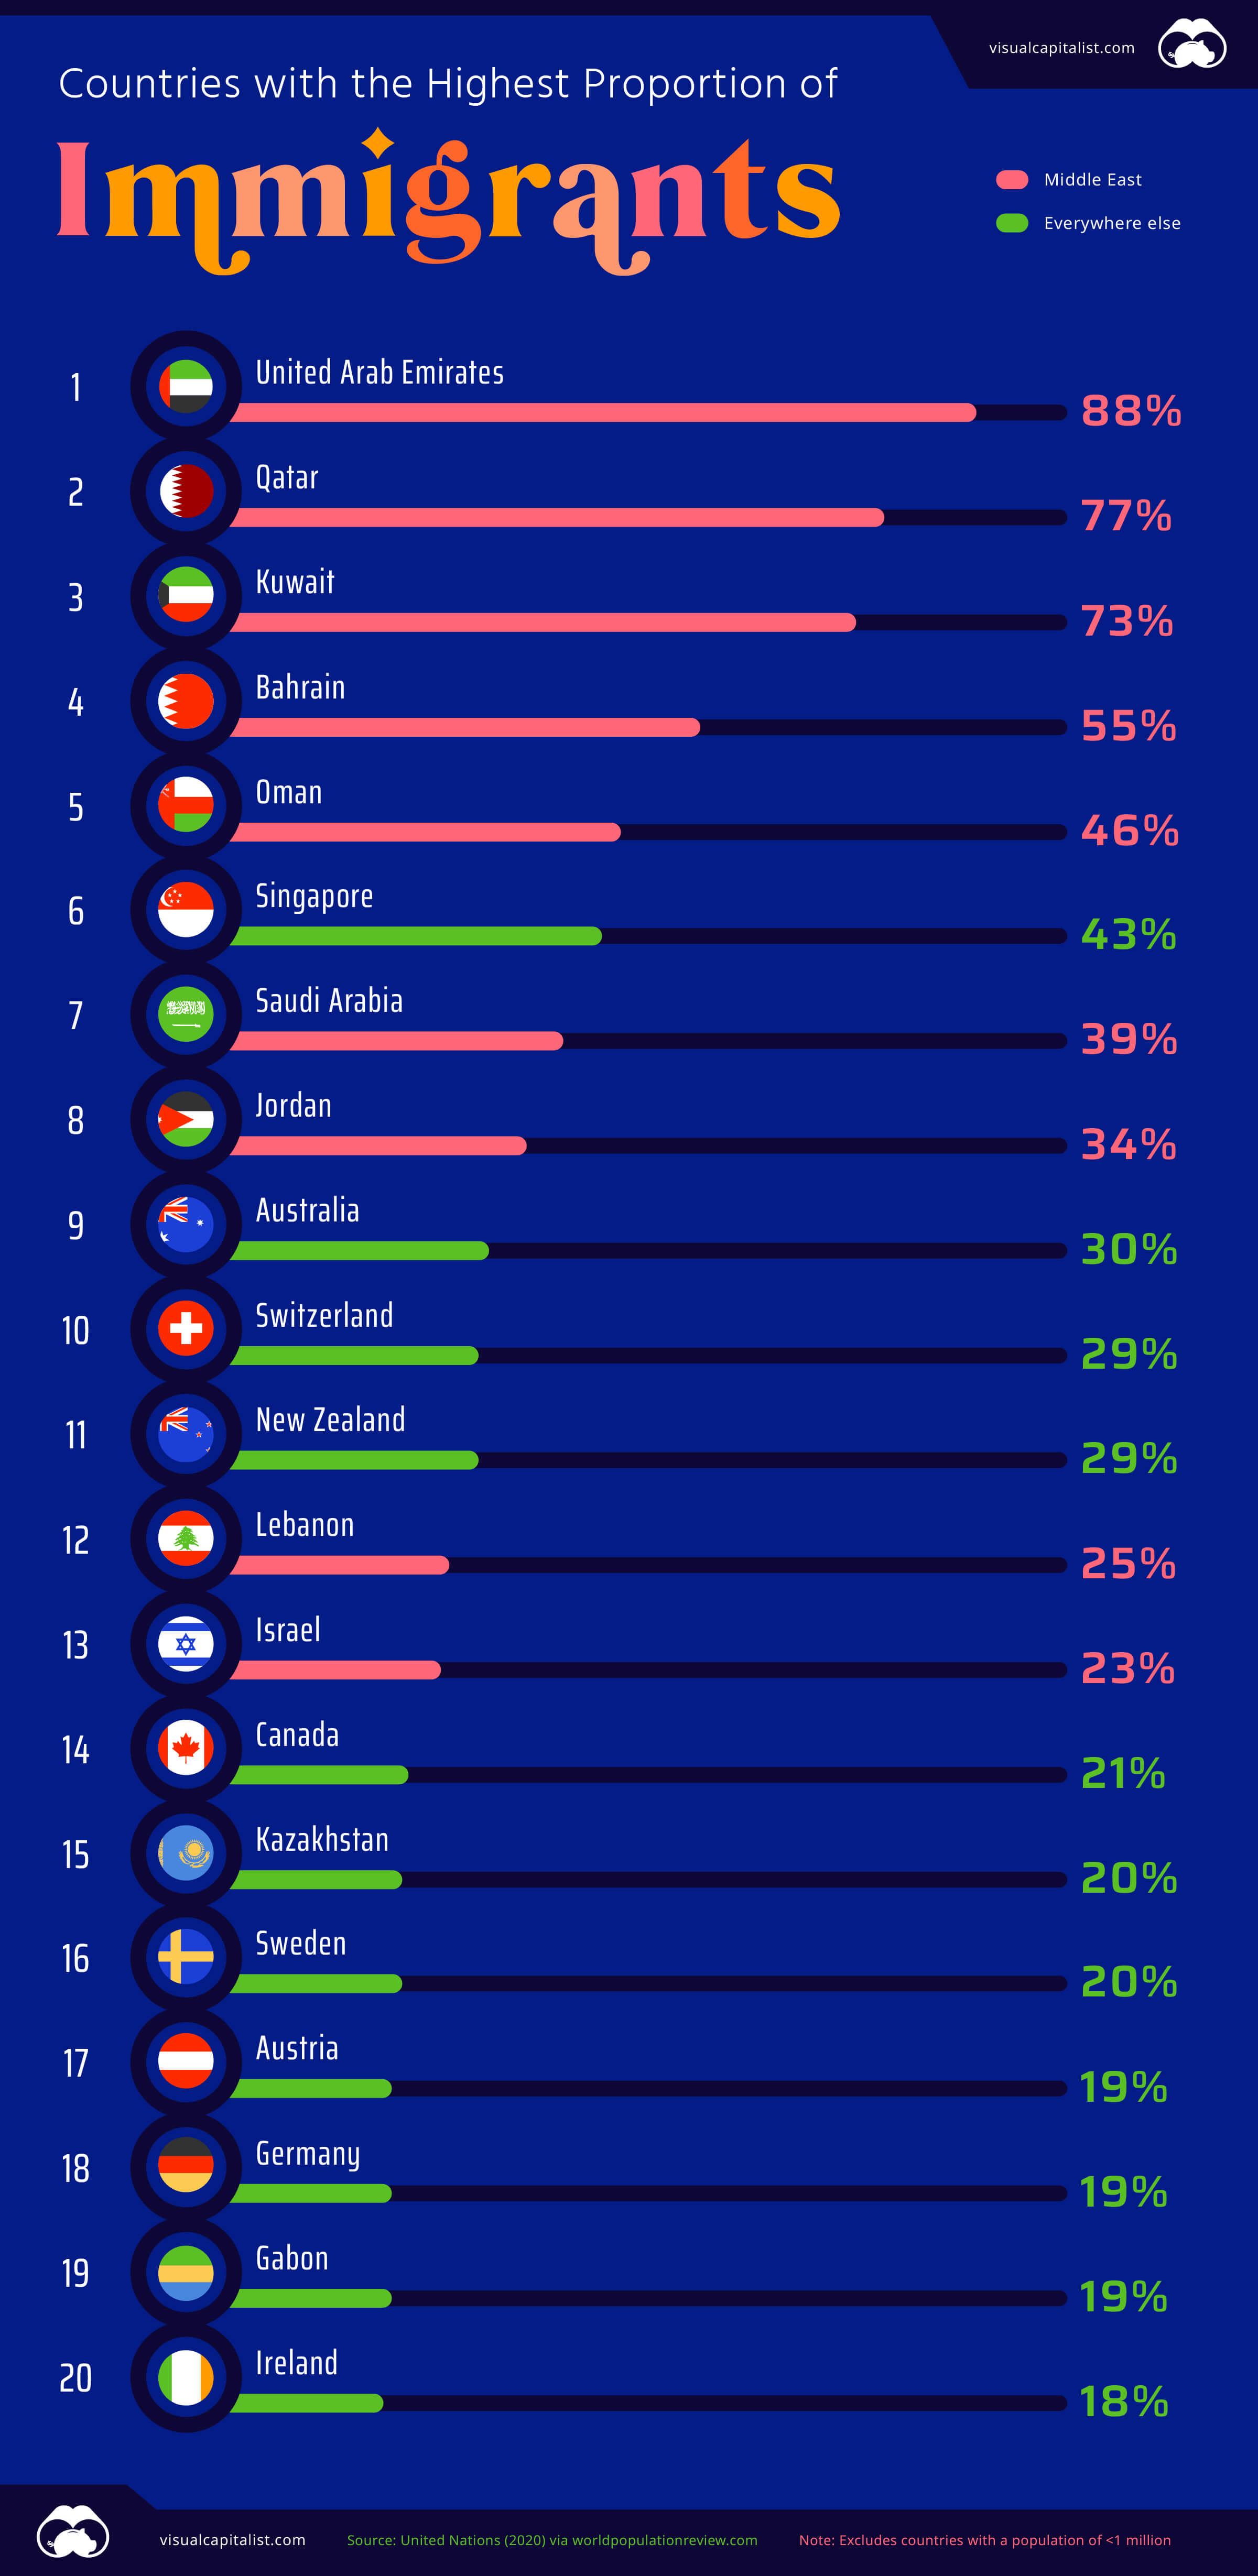 Chart: The best countries in the world